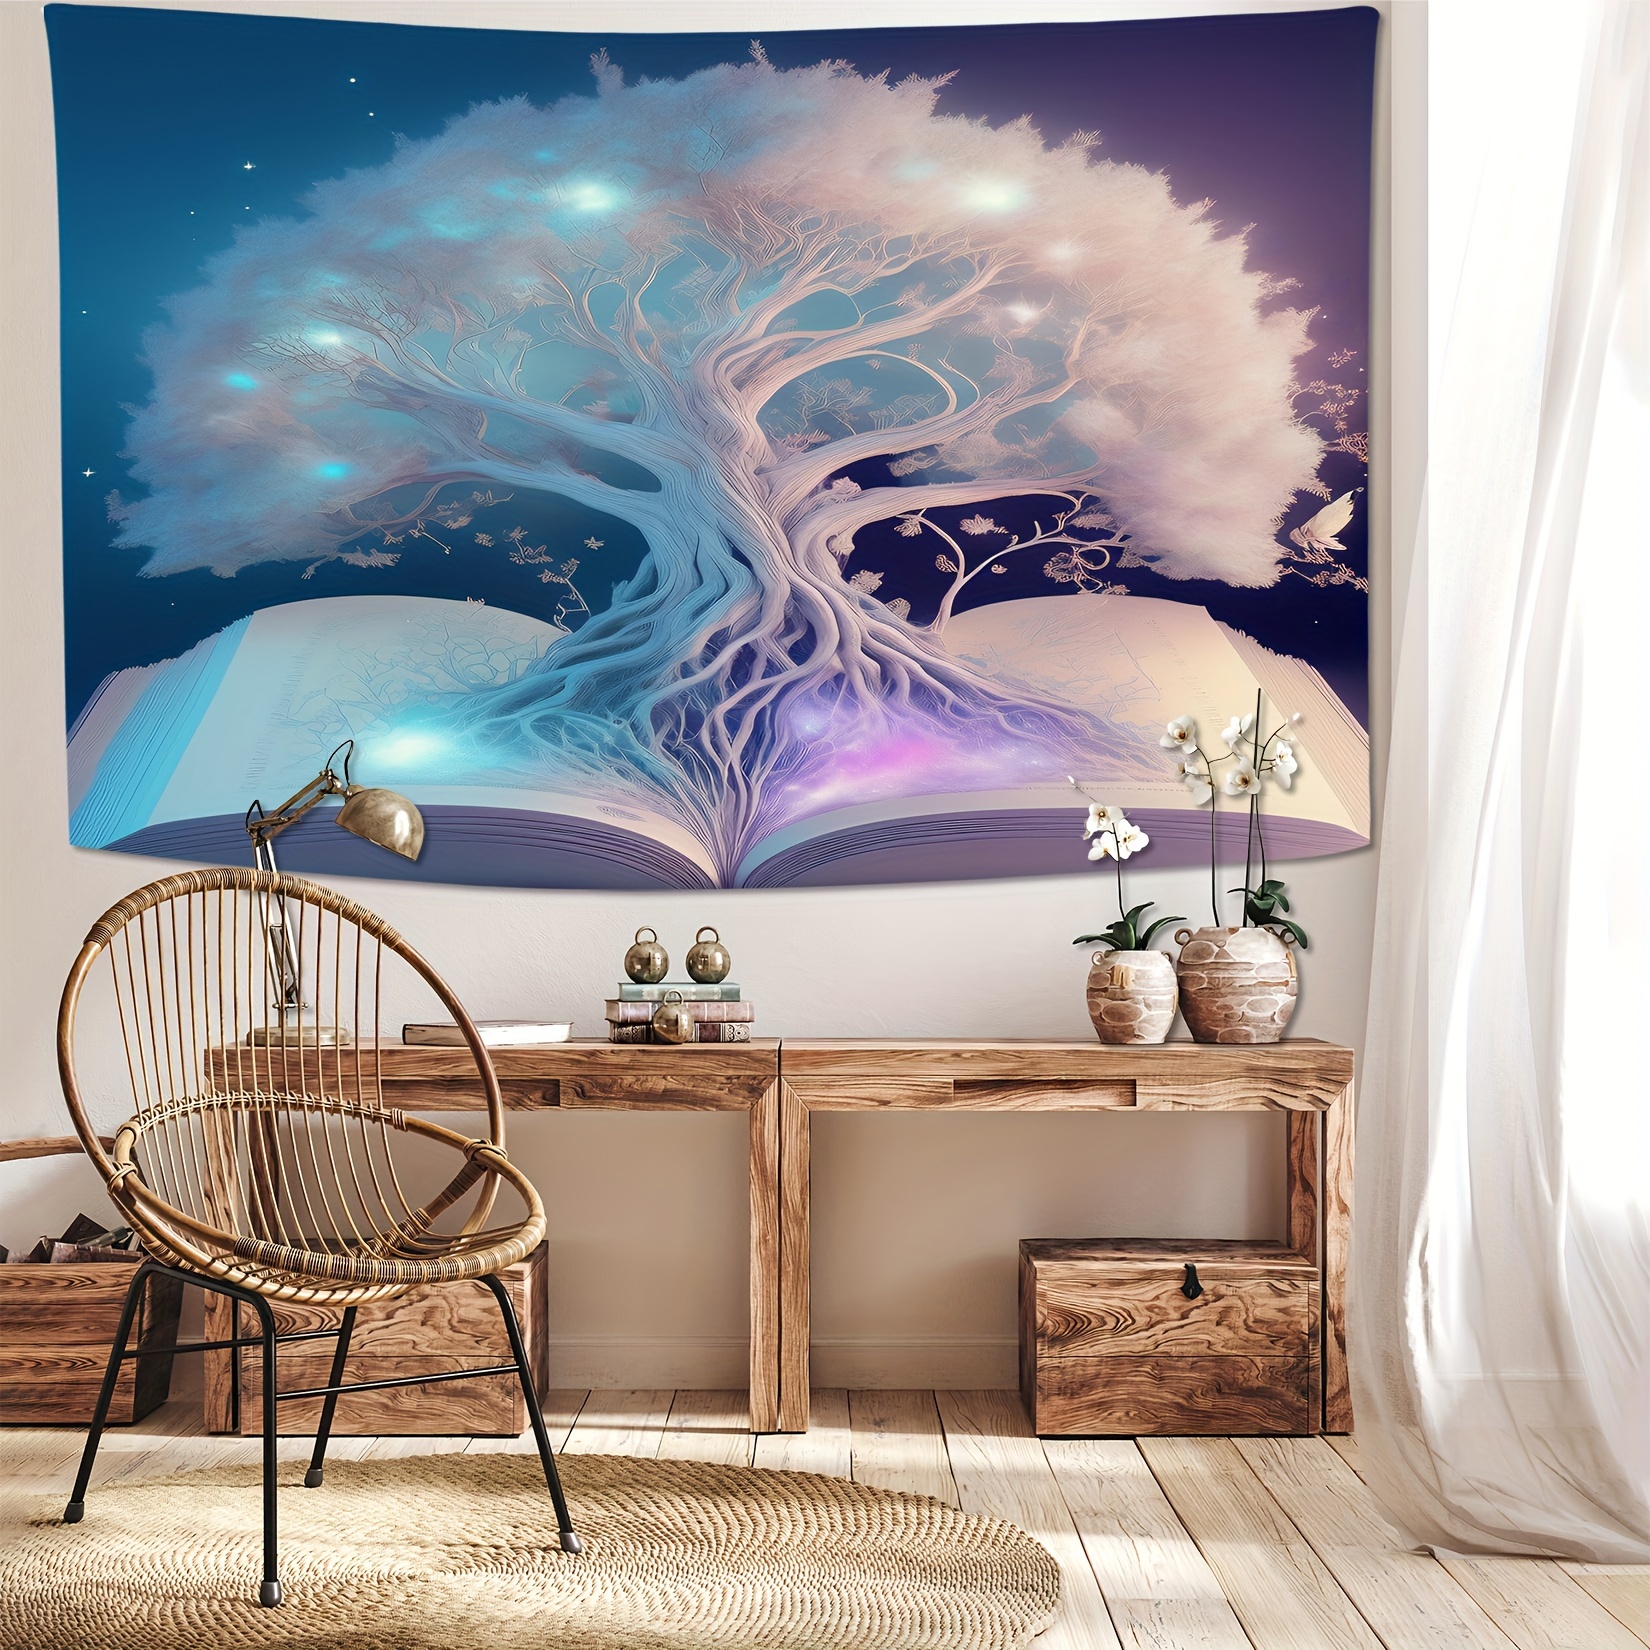 

Tree Of Life Dreamy Landscape Tapestry - Polyester Wall Hanging For Living Room, Bedroom, Office - Home & Party Decor With Free Installation Kit